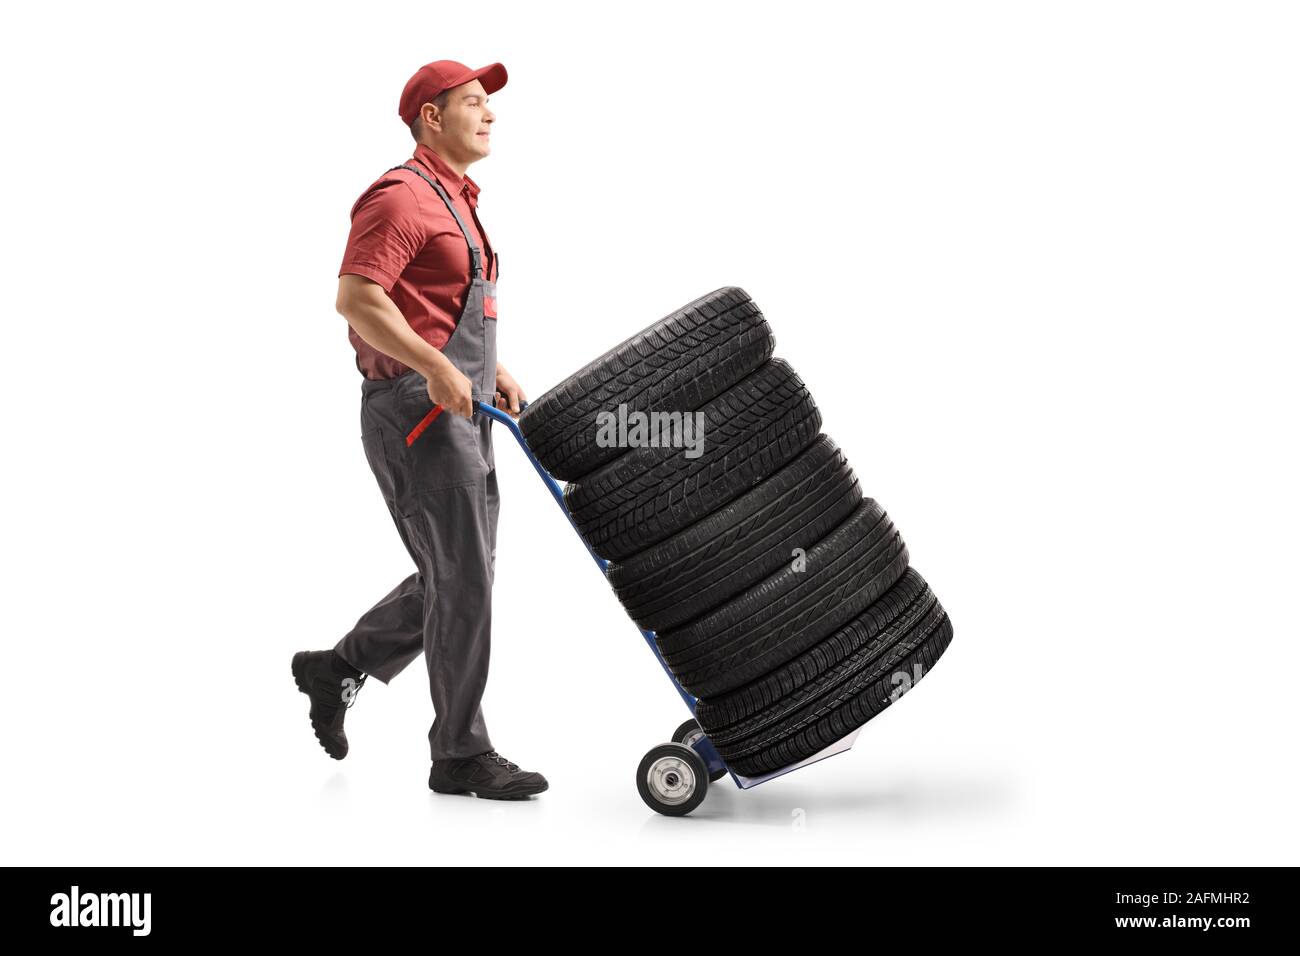 Full length profile shot of a worker pushing car tires with a hand truck isolated on white background Stock Photo